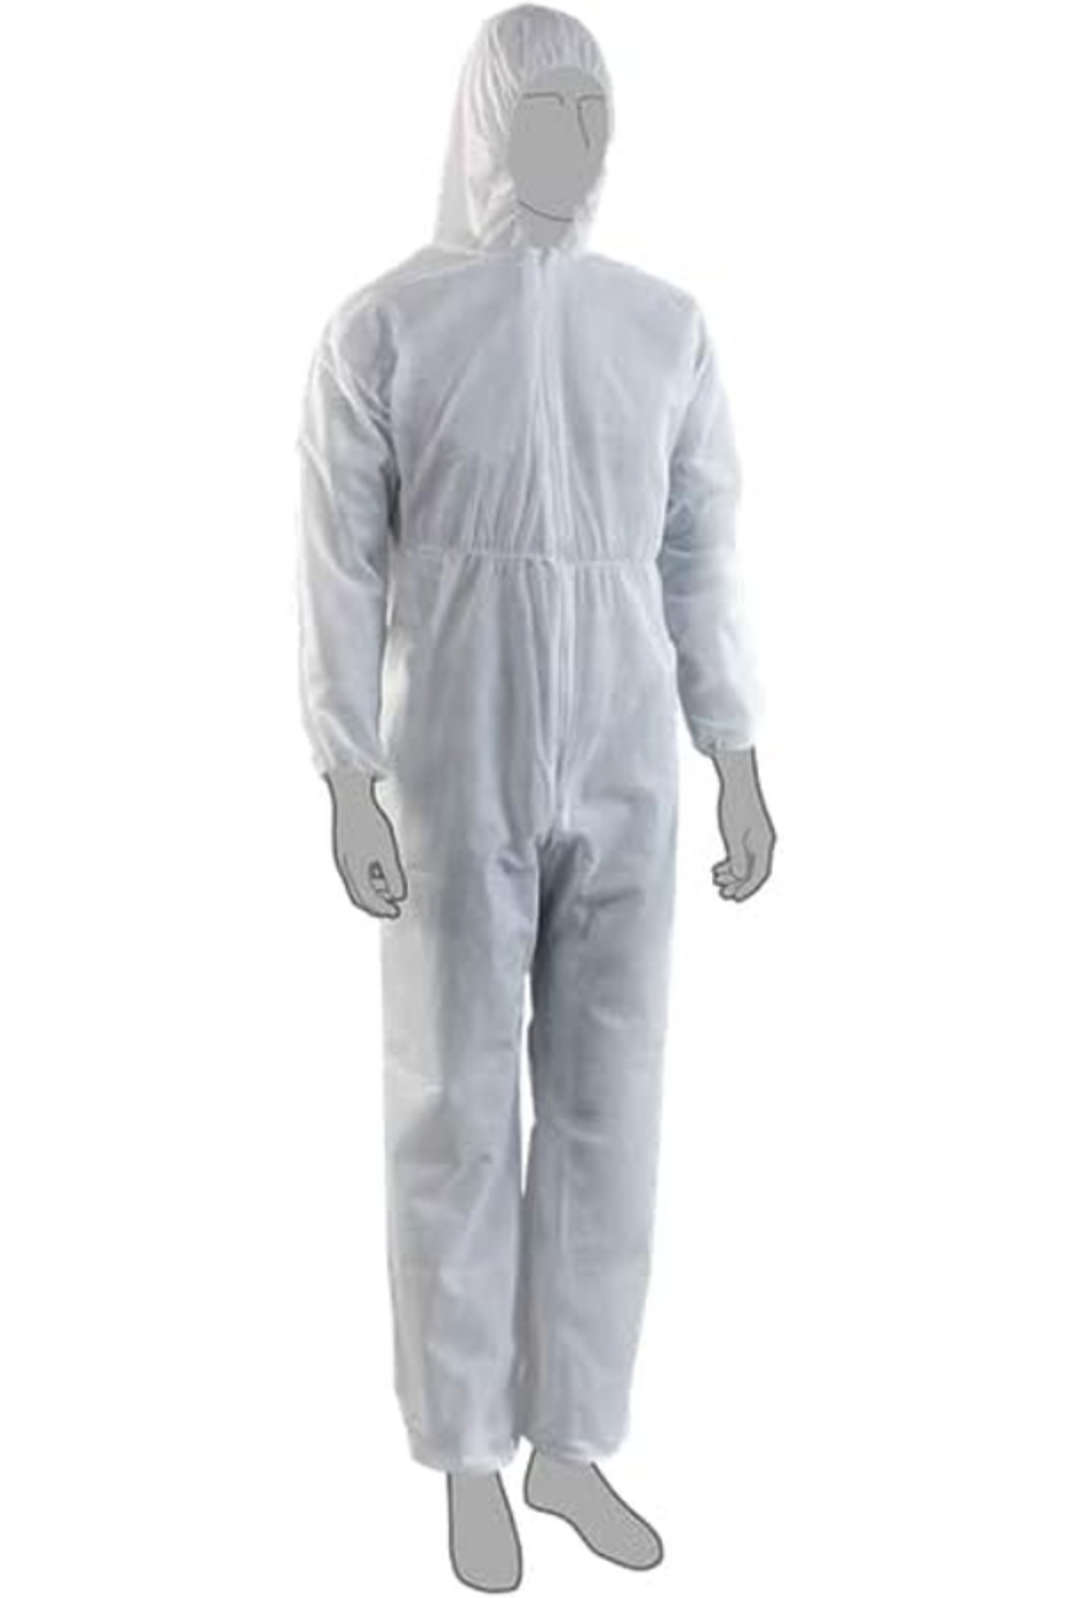 Coverall with Hood PPE Kit